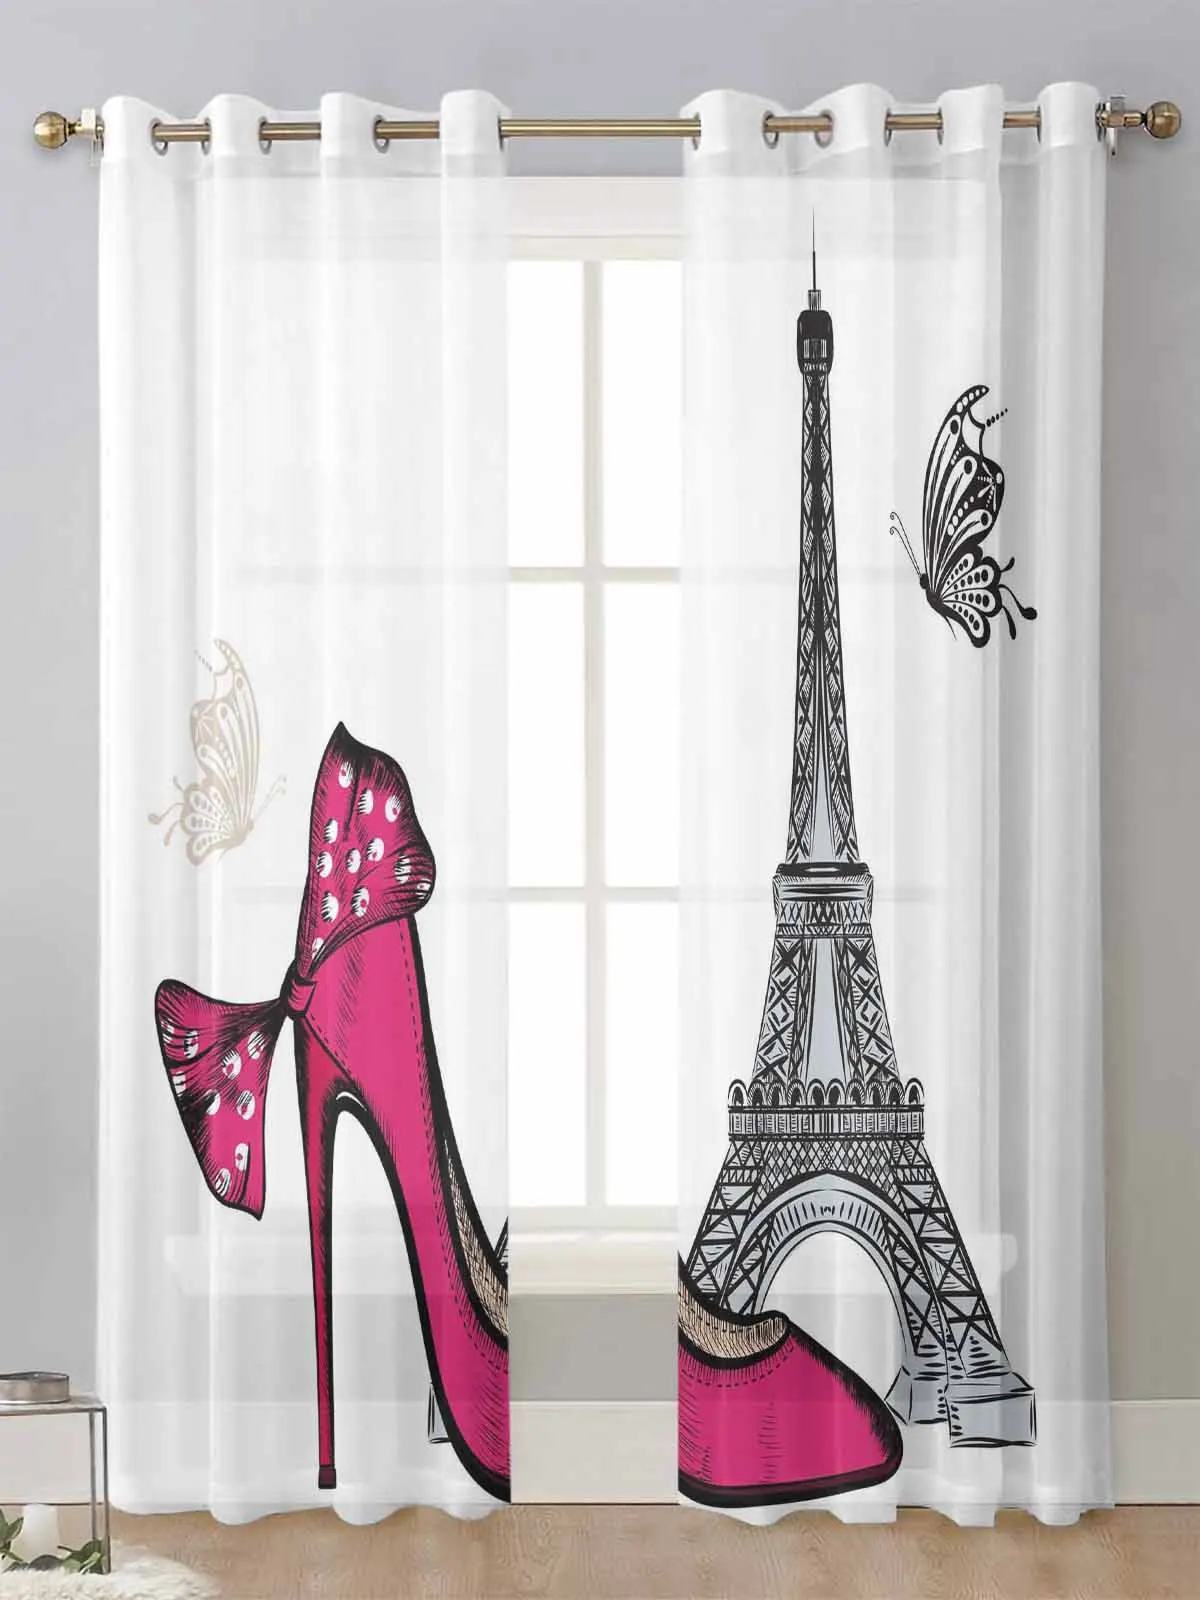 

Red High Heels Eiffel Tower Butterfly White Sheer Curtains For Living Room Window Voile Tulle Curtain Cortinas Drapes Home Decor